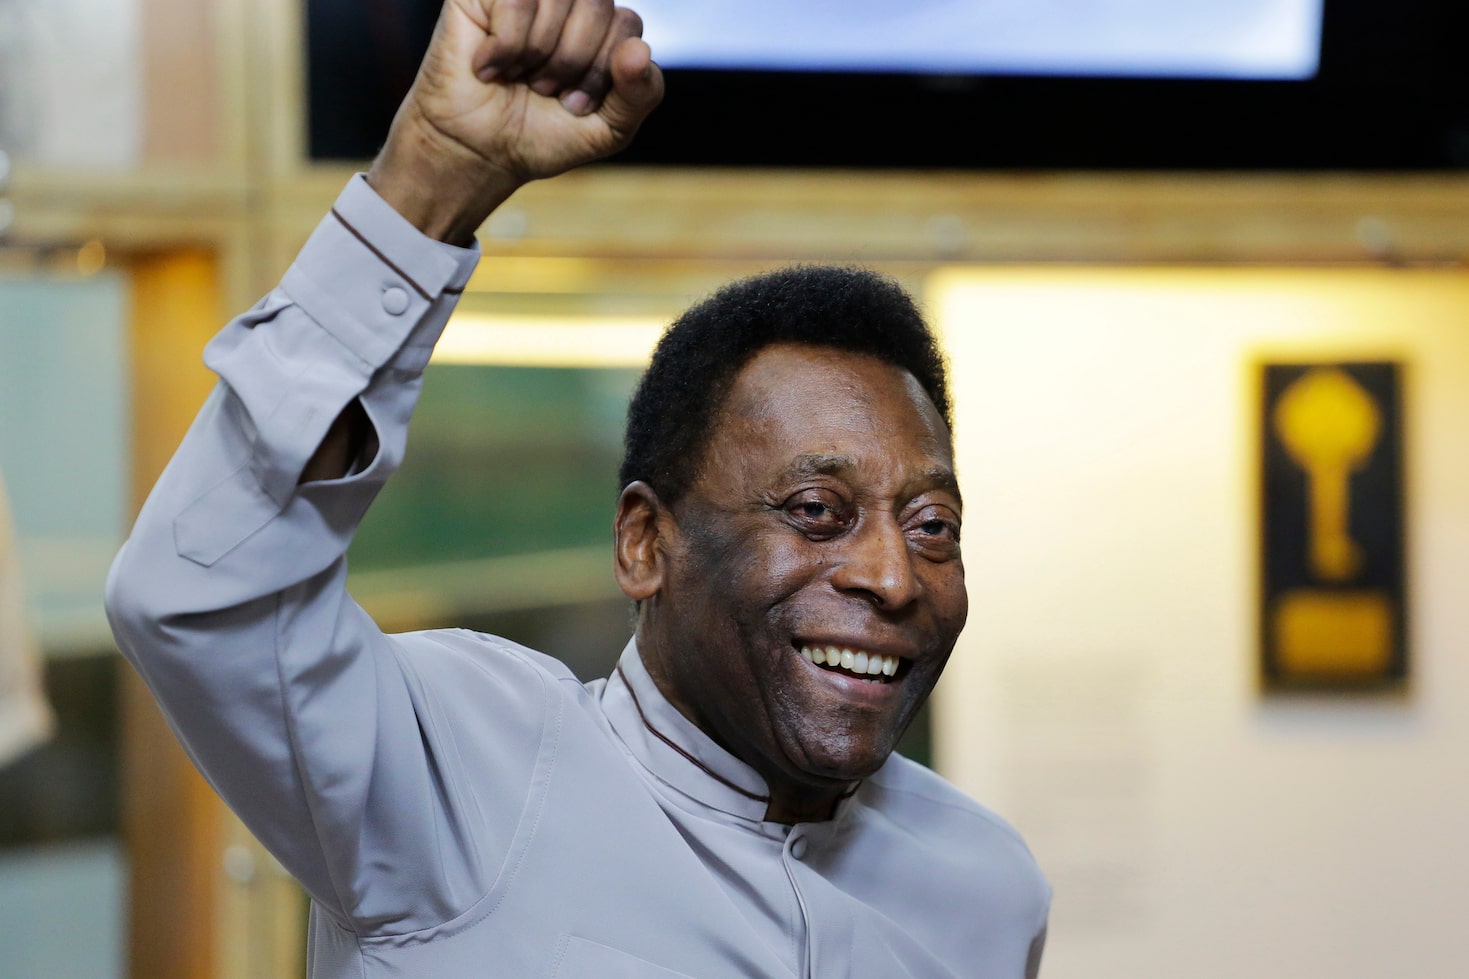 Number 10 in Soccer- Pele won a World Cup as Brazil's number 10